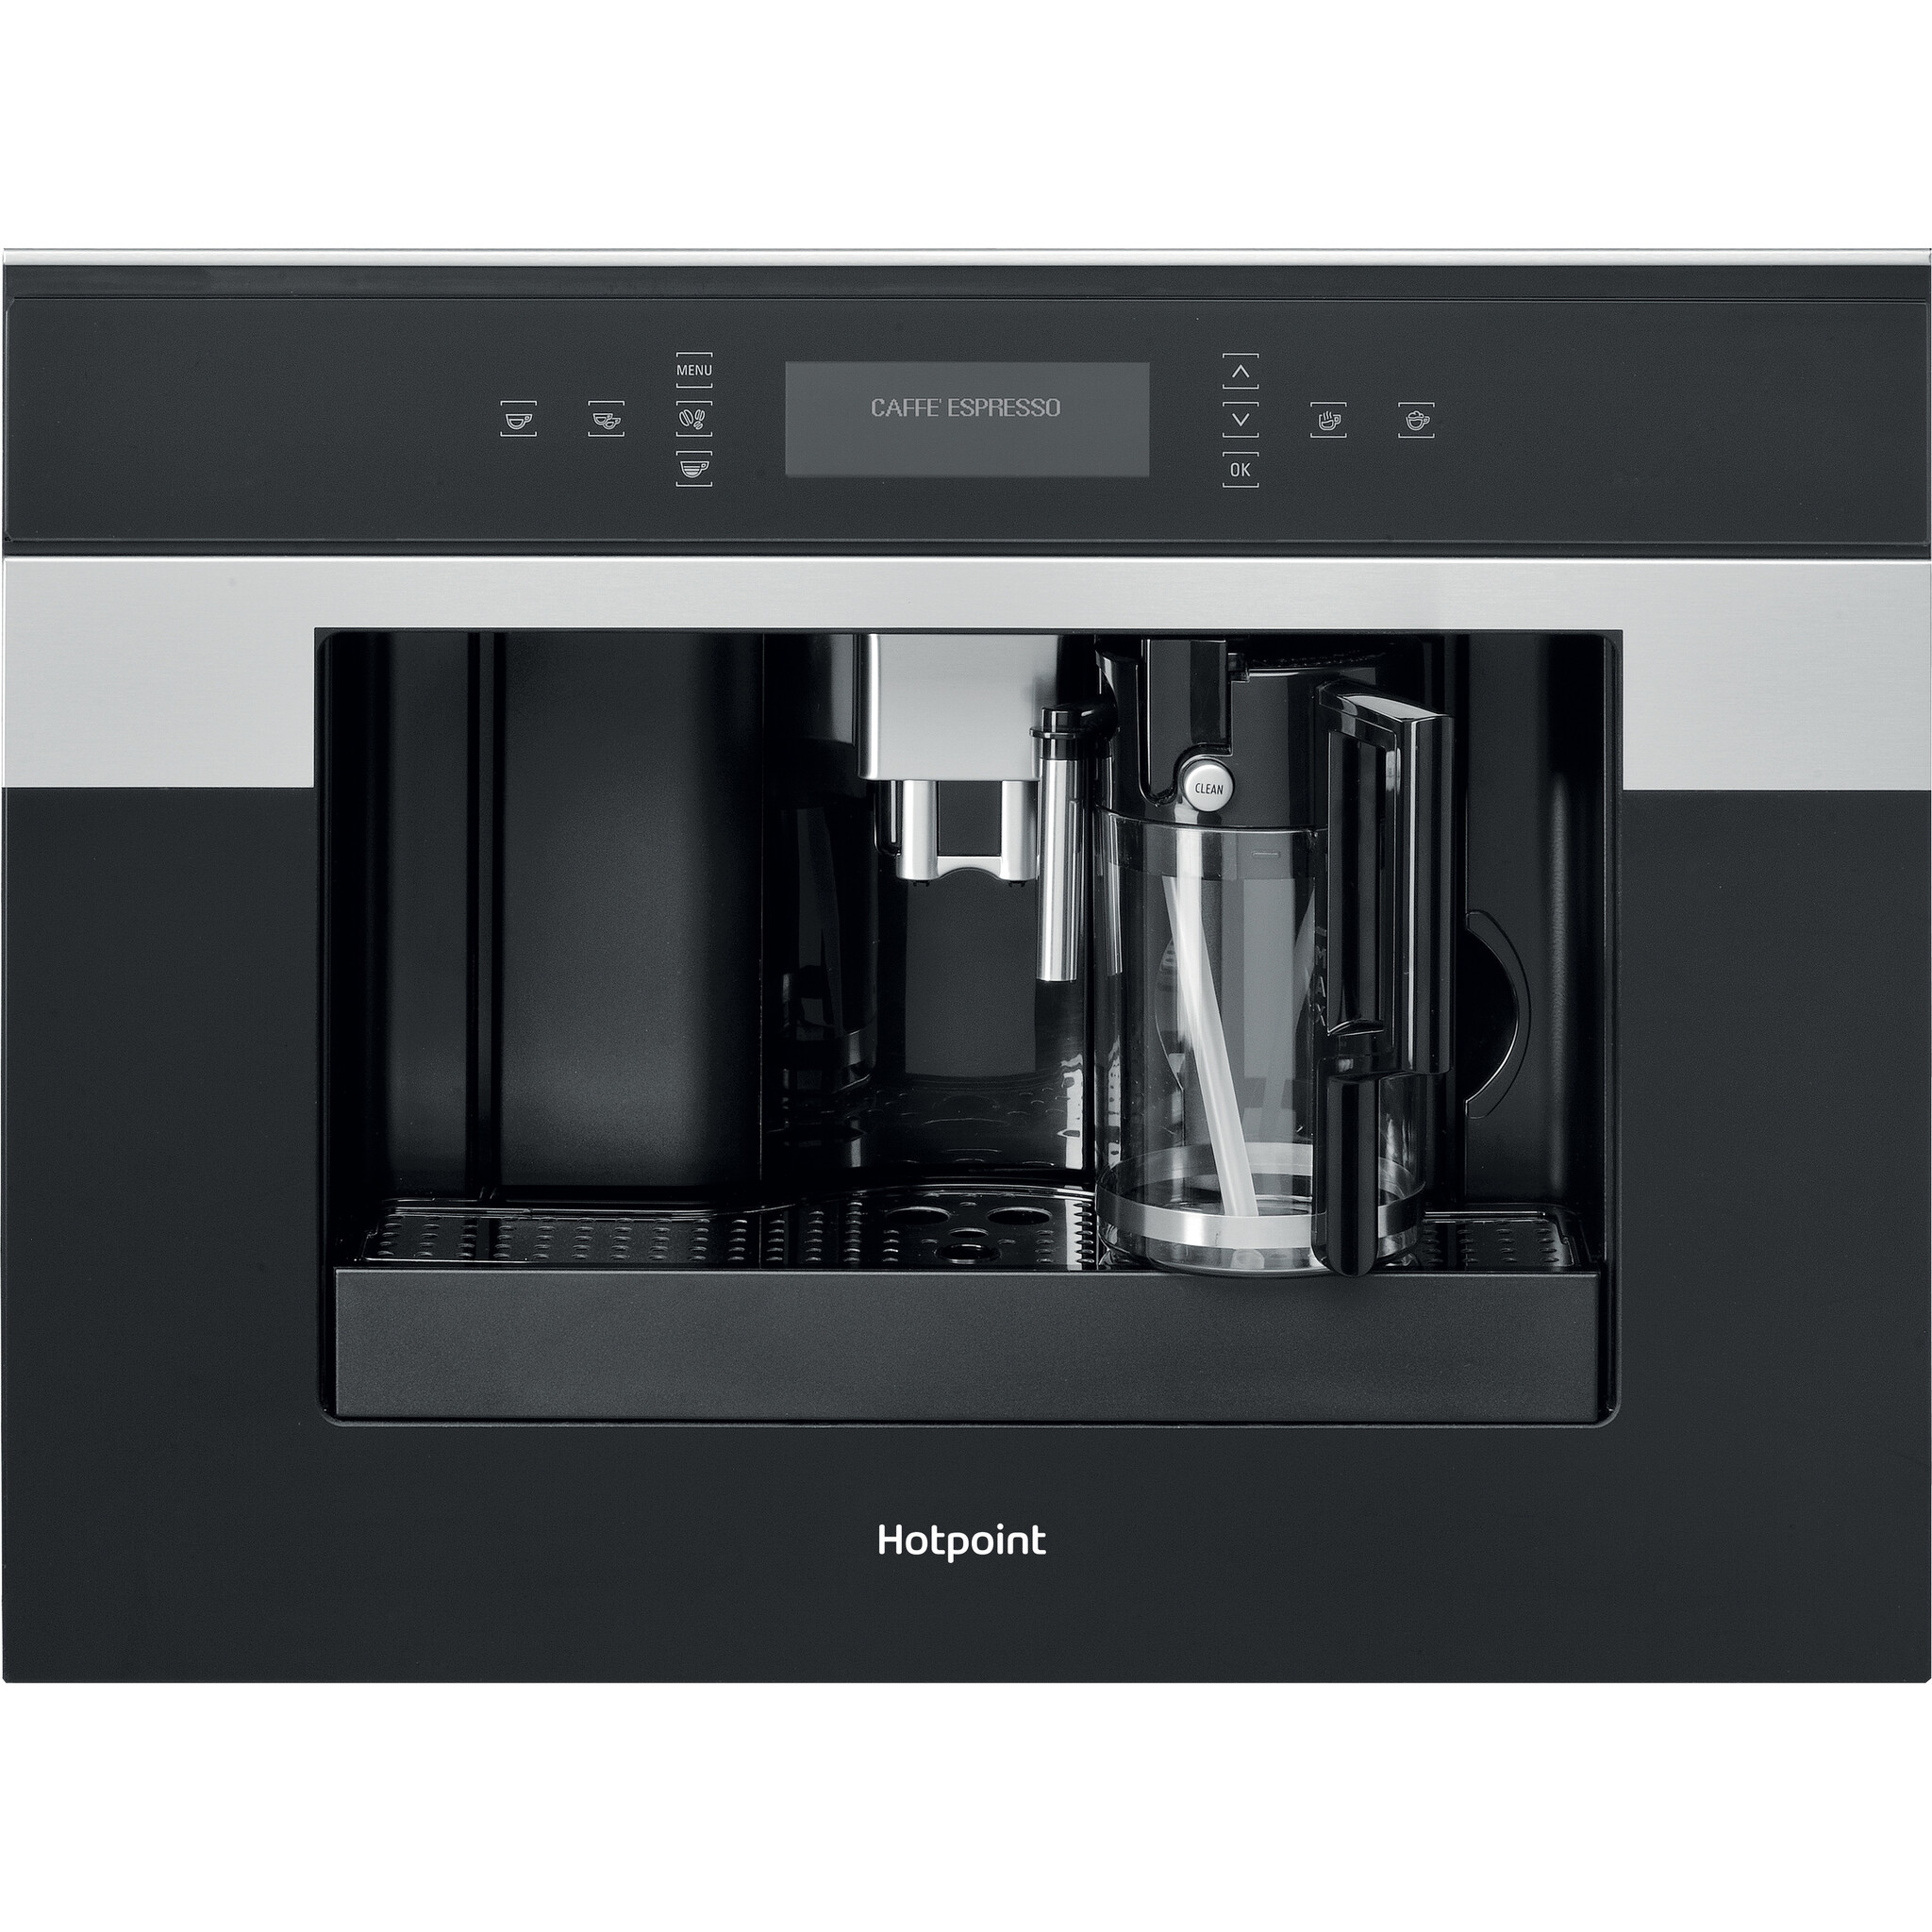 Hotpoint Class 9 Built In Coffee Machine Touch Control 45cm – Bean To Cup (CM9945H) – Stainless Steel/Black #359519